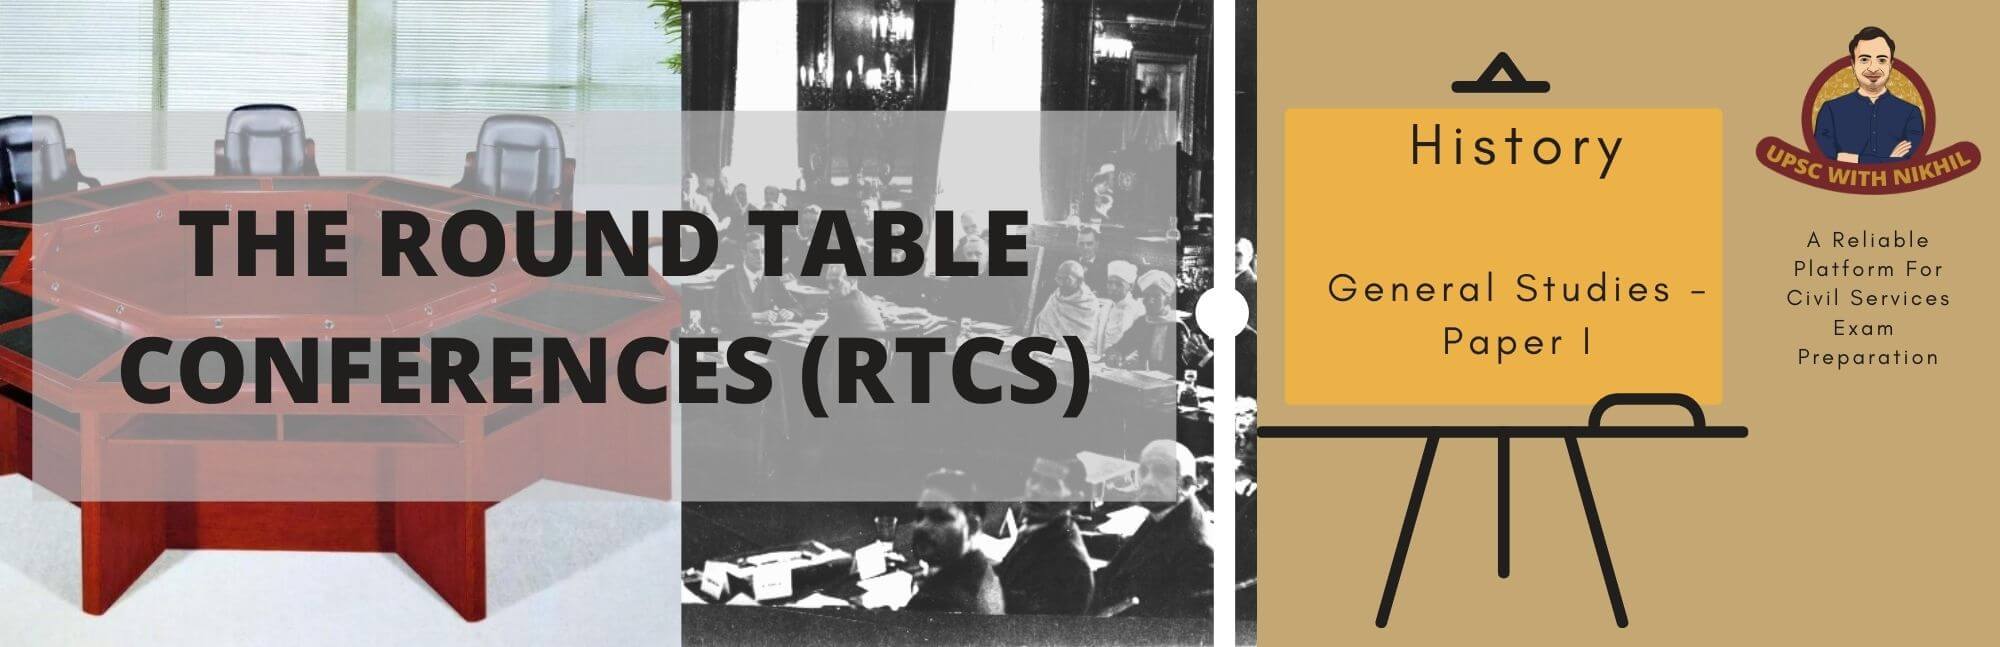 The Round Table Conferences Rtcs, Who Chaired The First Round Table Conference